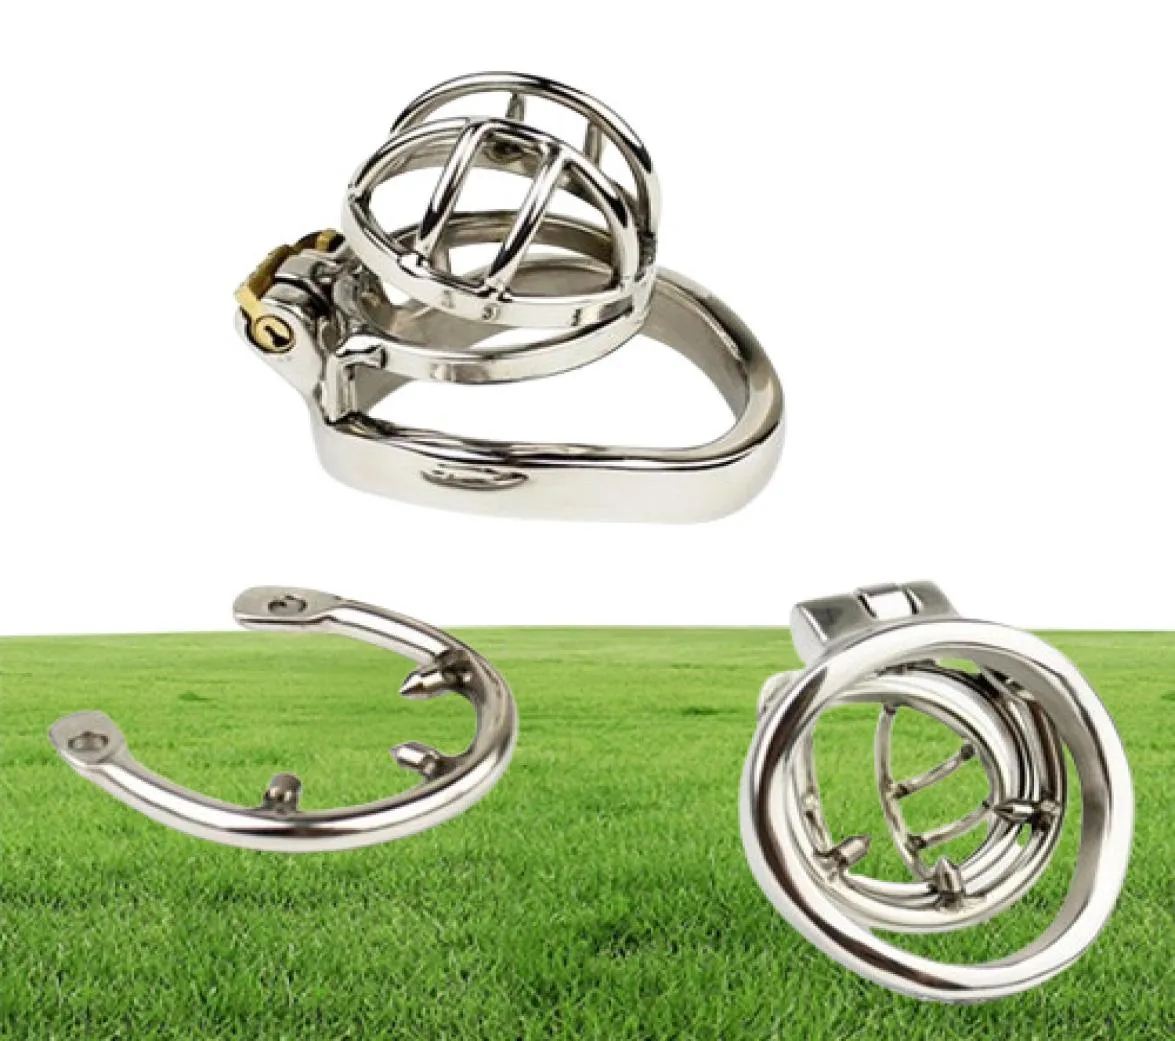 NEW Stainless Steel Super Small Cage with Antioff ring BDSM Sex Toys For Men Device 35mm Short Cage4460423